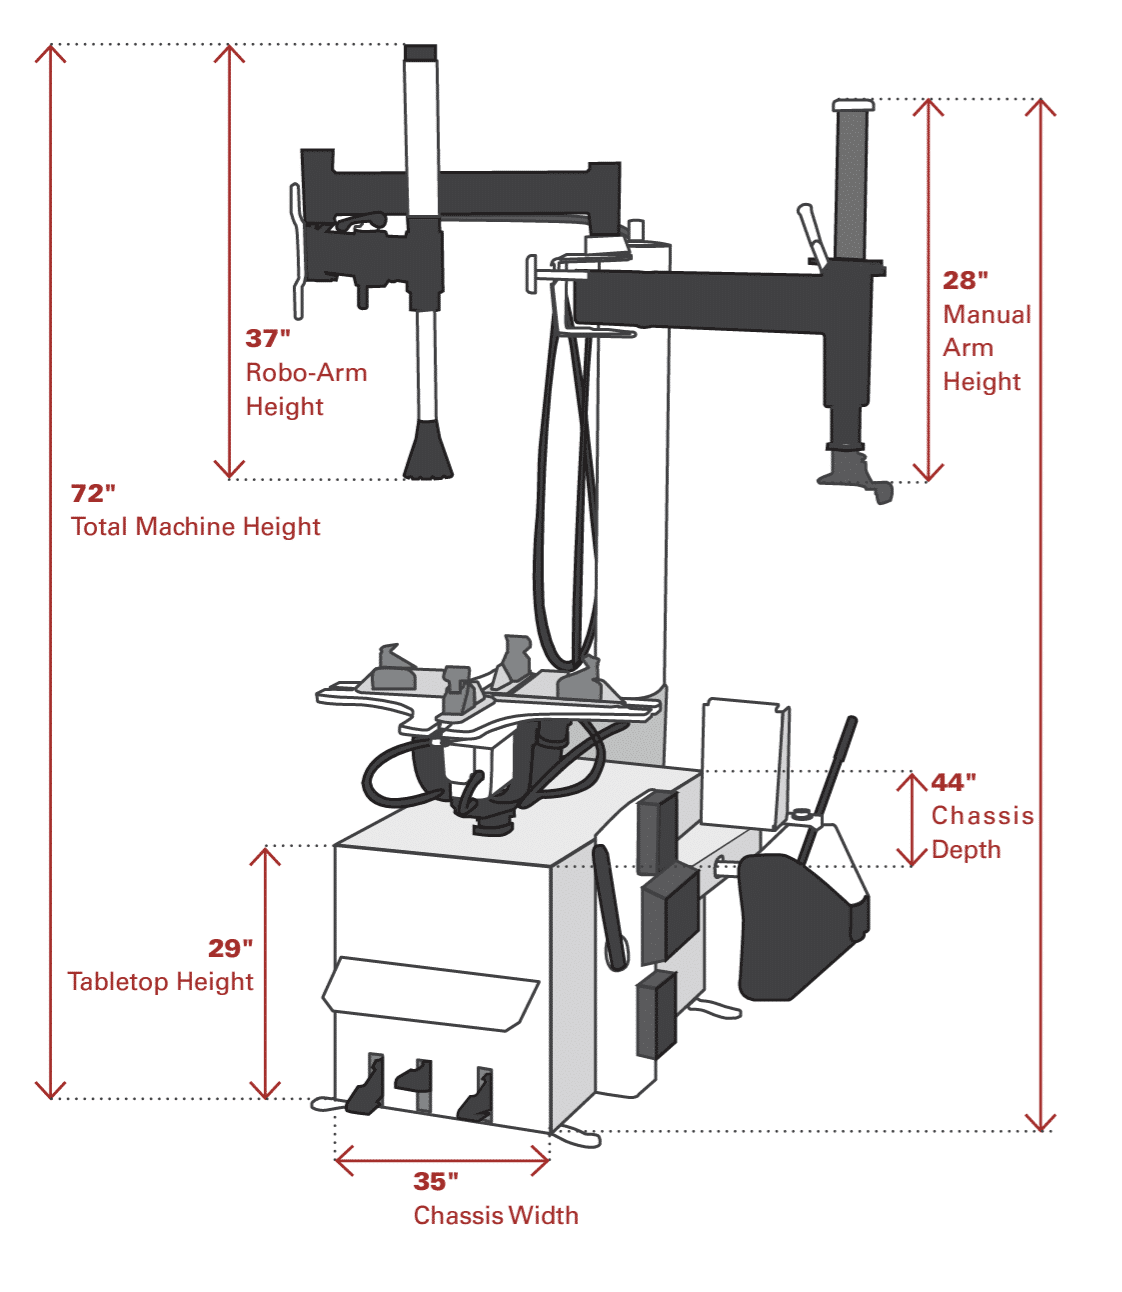 Front diagram of a Coats RC 55 tire changer, showing height, width, and depth dimensions